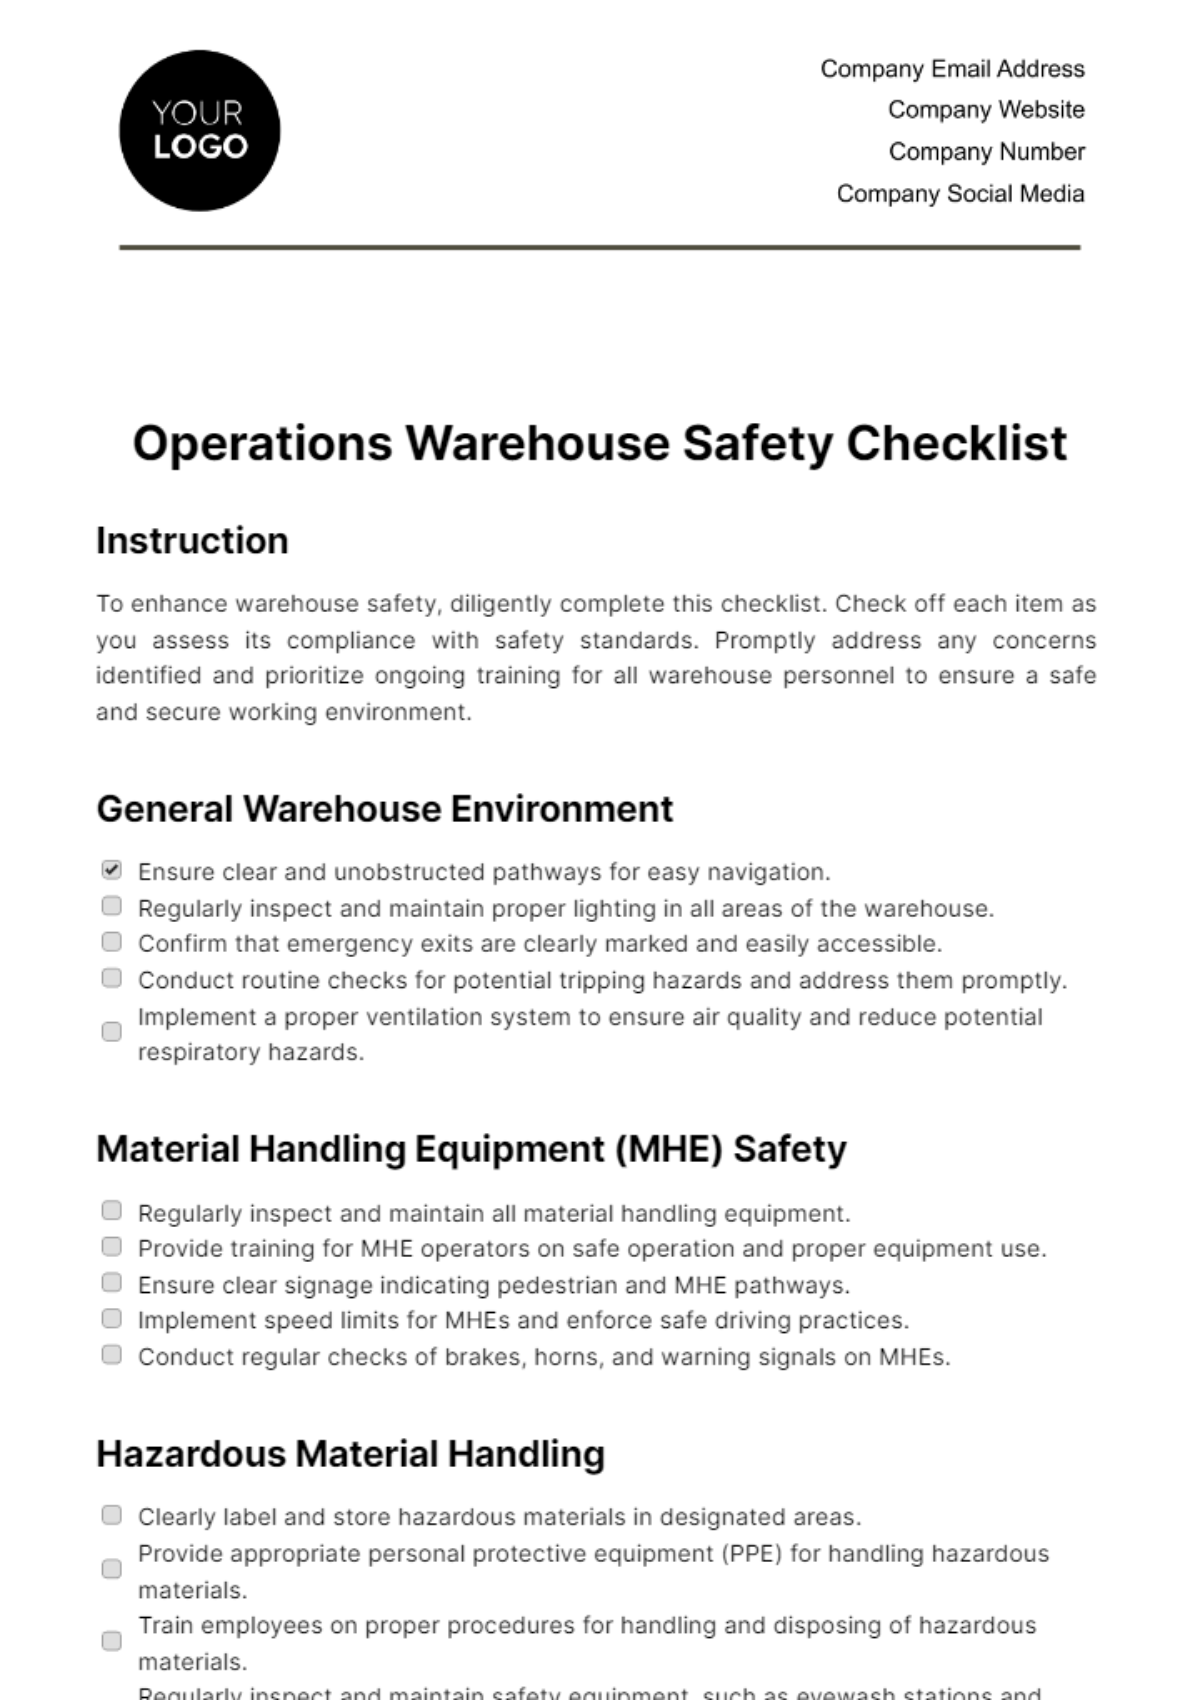 Free Operations Warehouse Safety Checklist Template